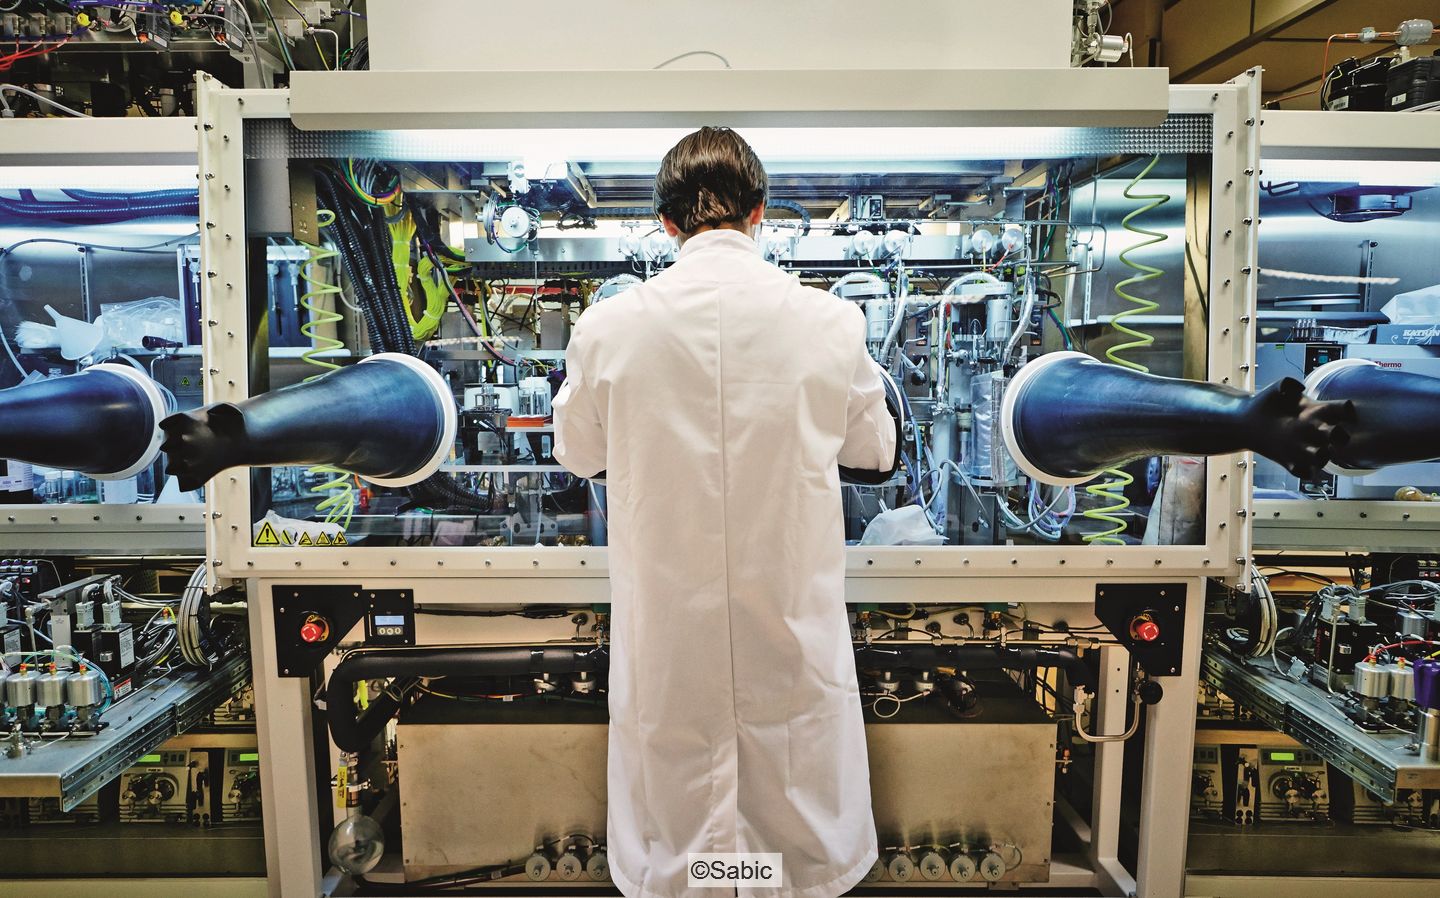 Employee at a fume hood at Sabic's research facility in the Netherlands